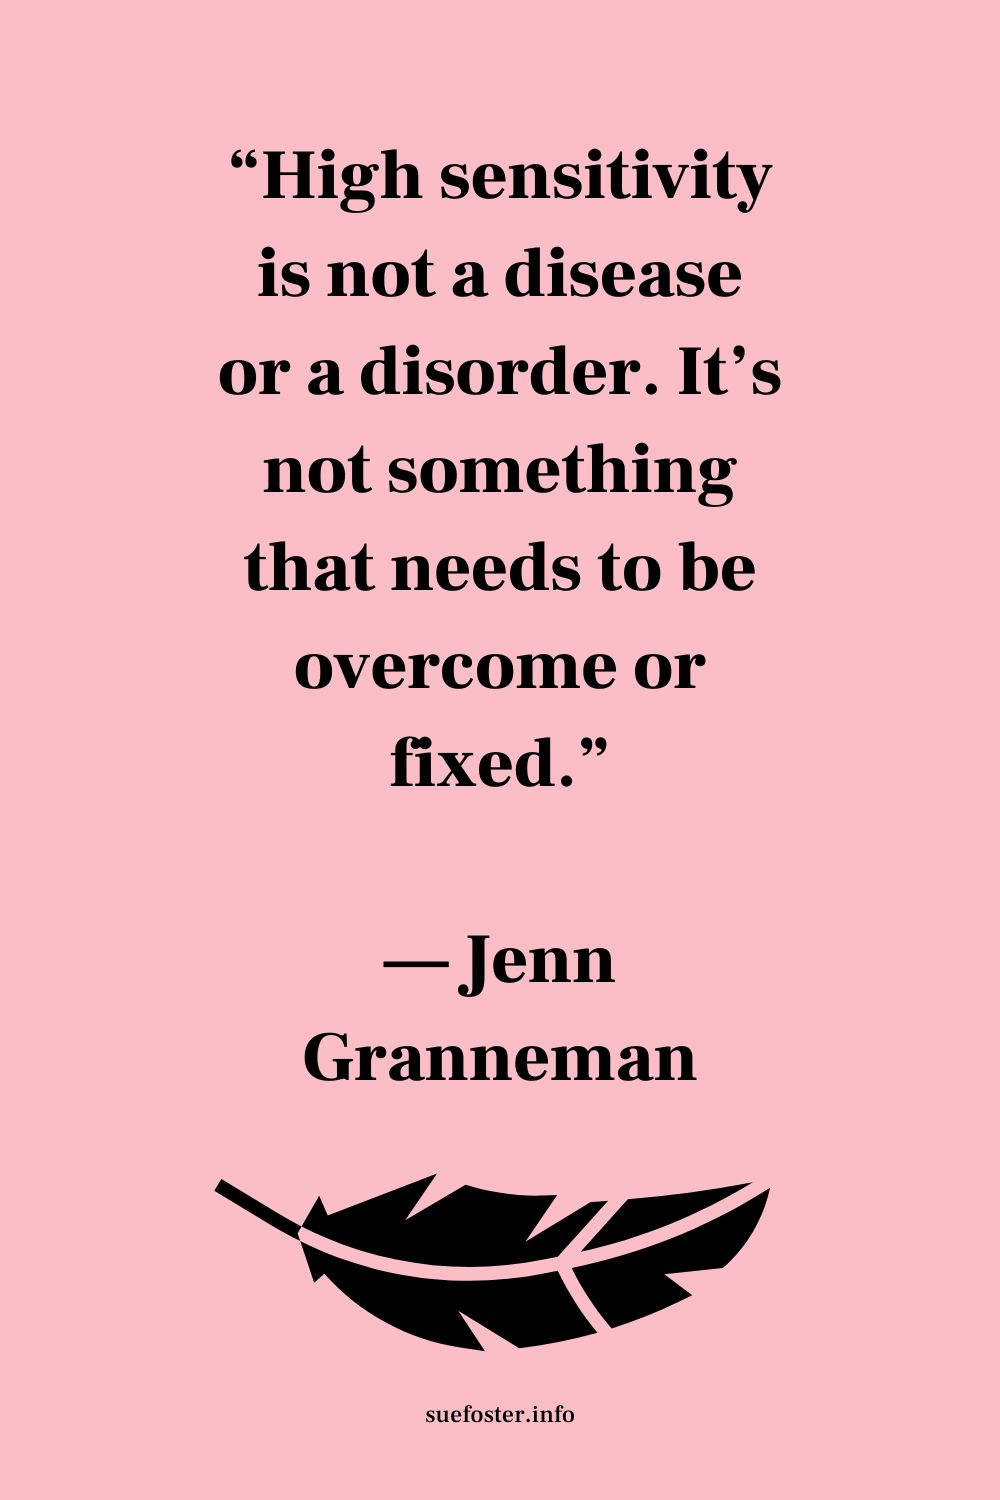 “High sensitivity is not a disease or a disorder. It’s not something that needs to be overcome or fixed.” -Jenn Granneman